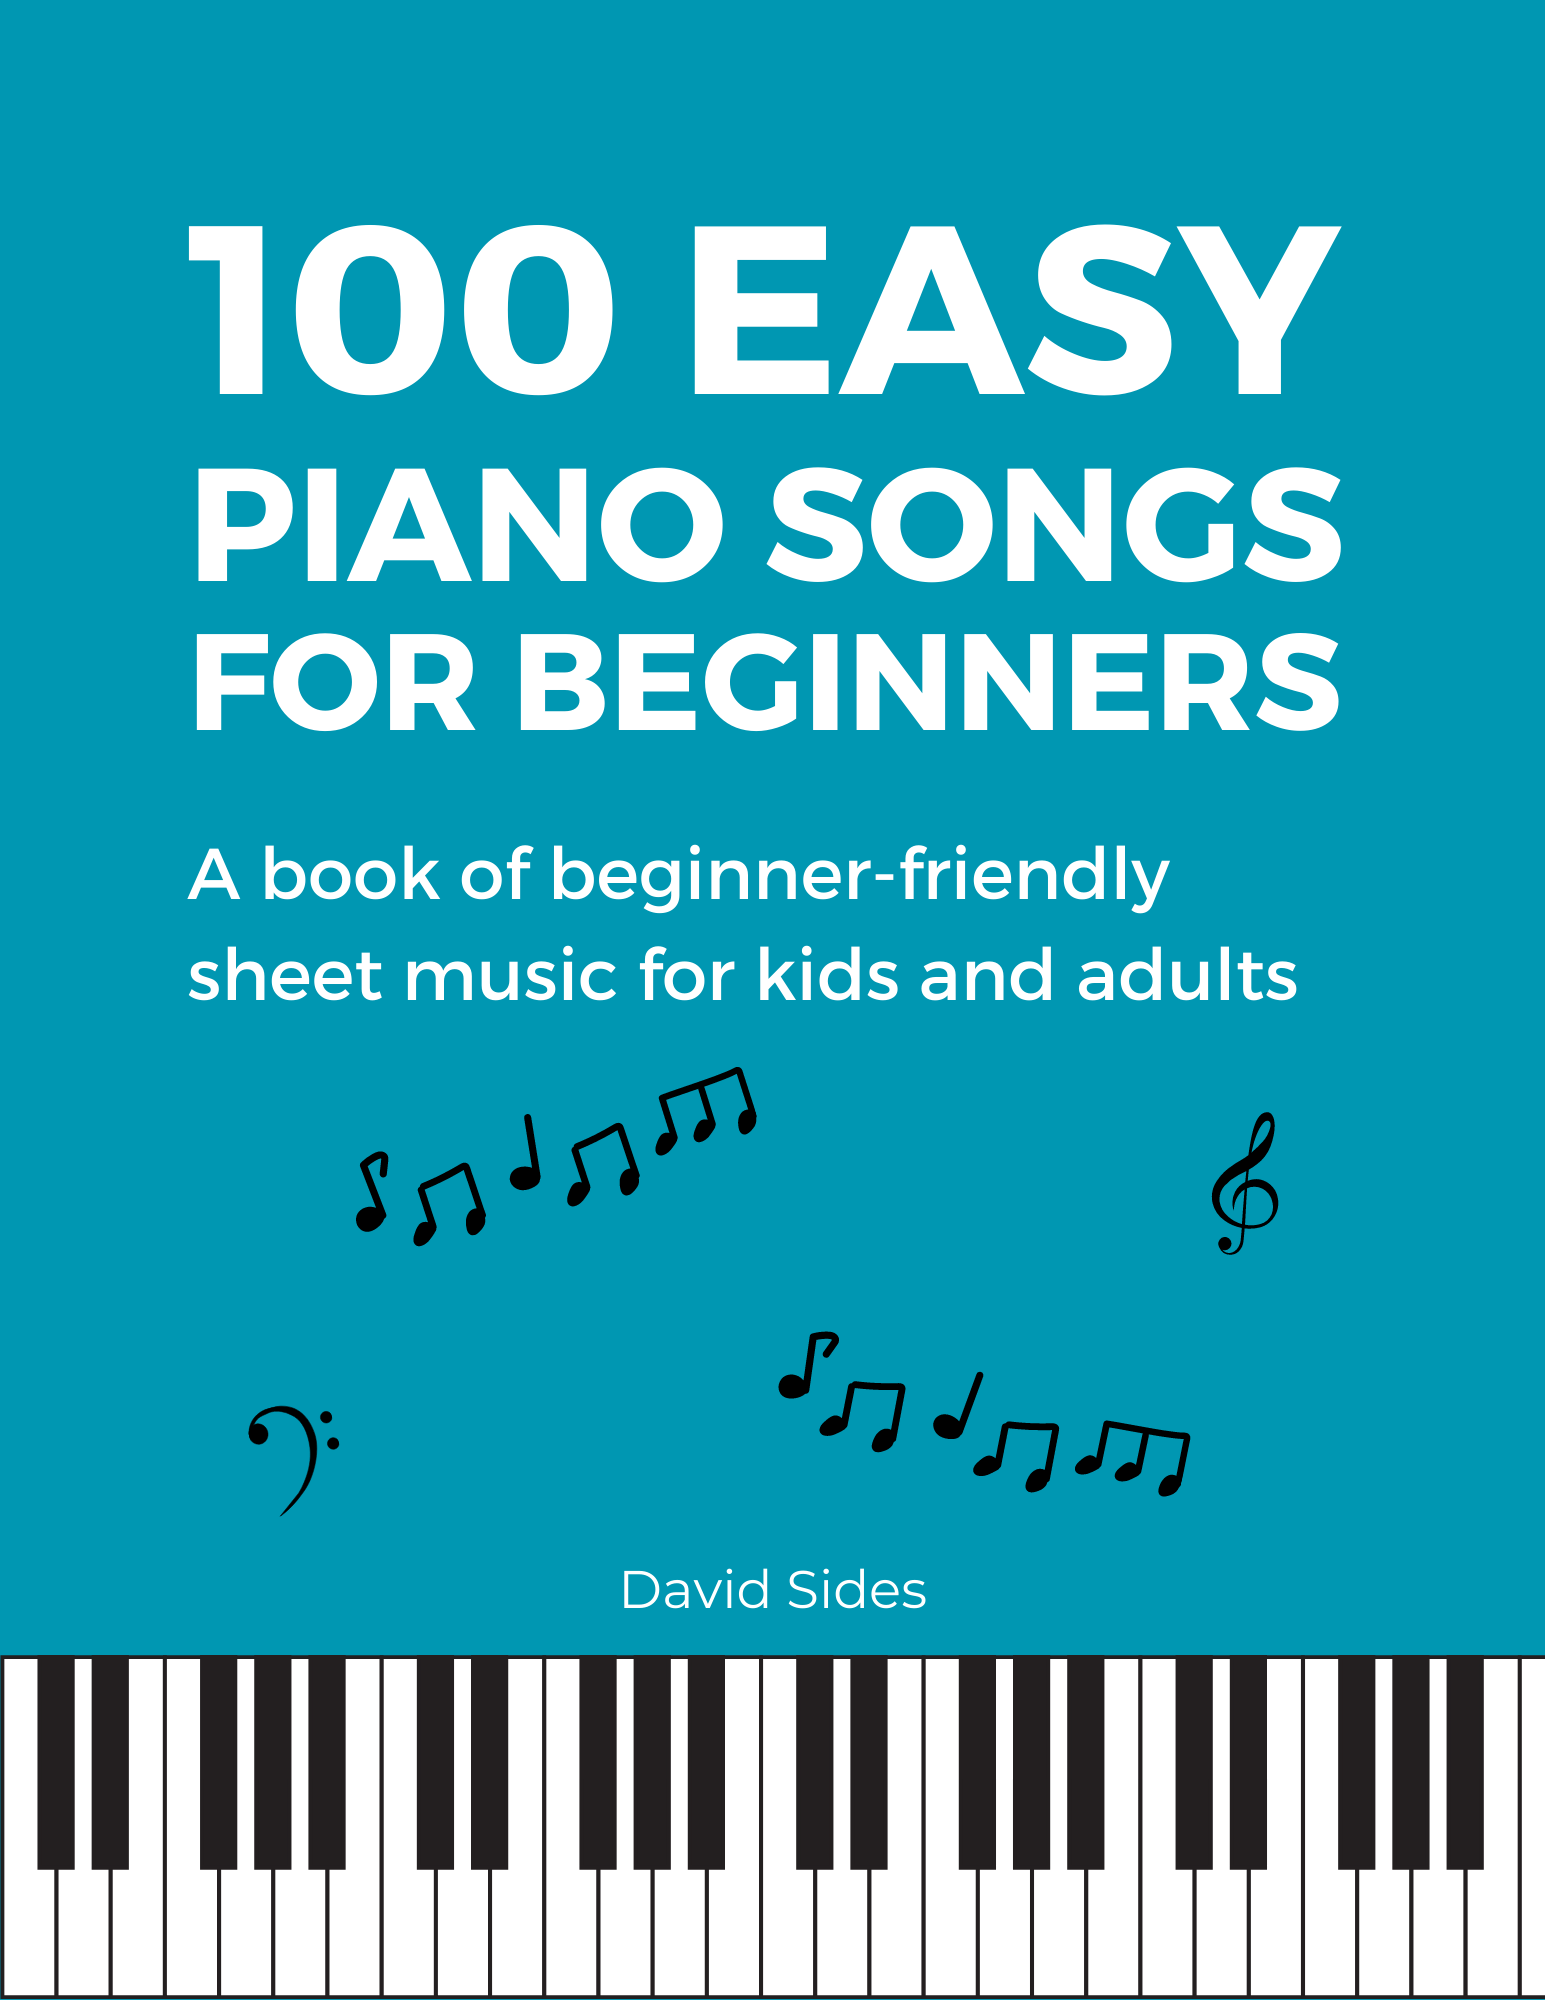 100 Easy Piano Songs for Beginners: A Book of Beginner-Friendly Sheet Music for Kids and Adults